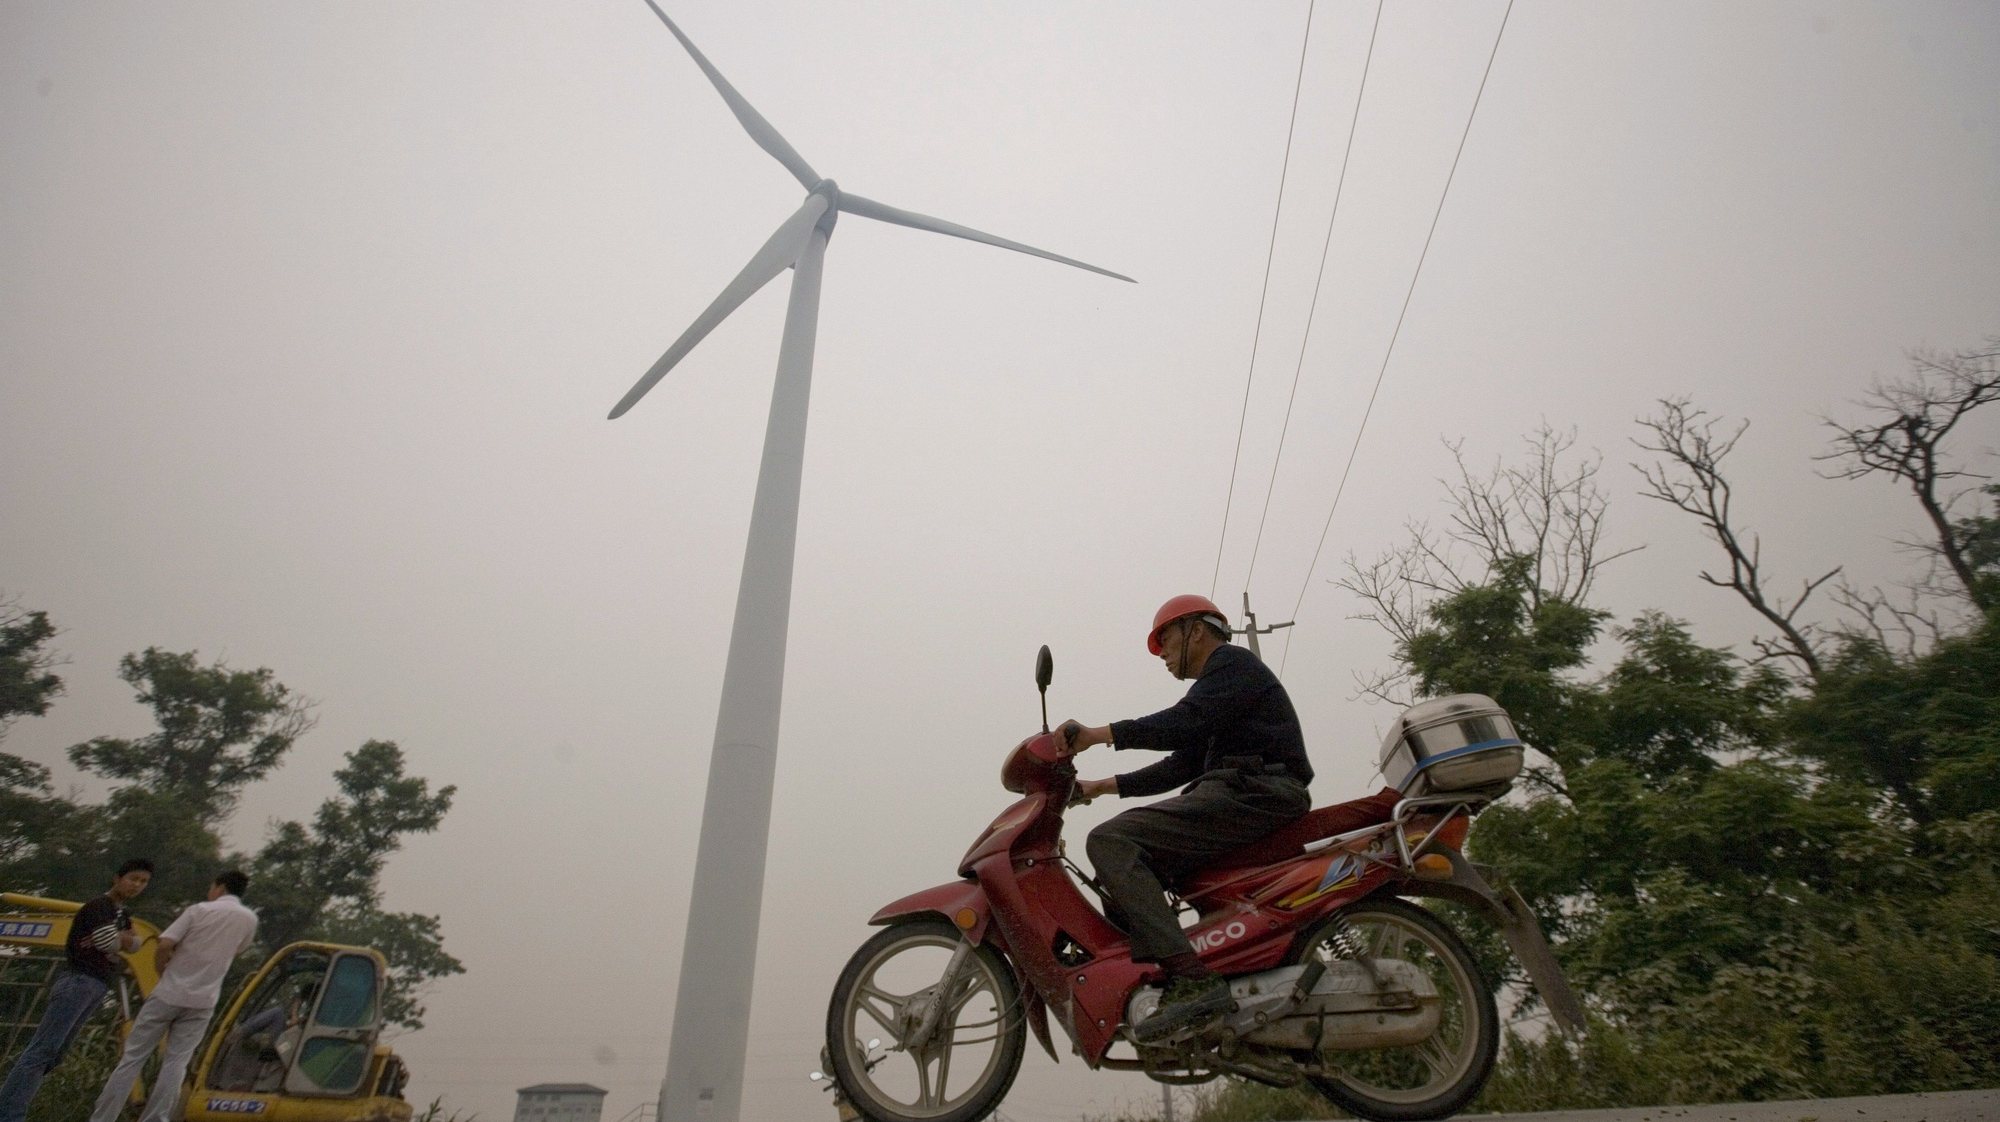 epa01749092 A man rides a motorcycle pass a large wind mill at the 100-megawatt Rudong wind farm, in Rudong city, China&#039;s Jiangsu province, 02 June 2009. Officials from China&#039;s National Energy Administration said today that China, currently the world&#039;s second-largest energy consumer behind the United States, will invest over 10 billion euro to increase the country&#039;s wind power capacity from 12,000 to 30,000 megawatts by 2010.  EPA/DIEGO AZUBEL